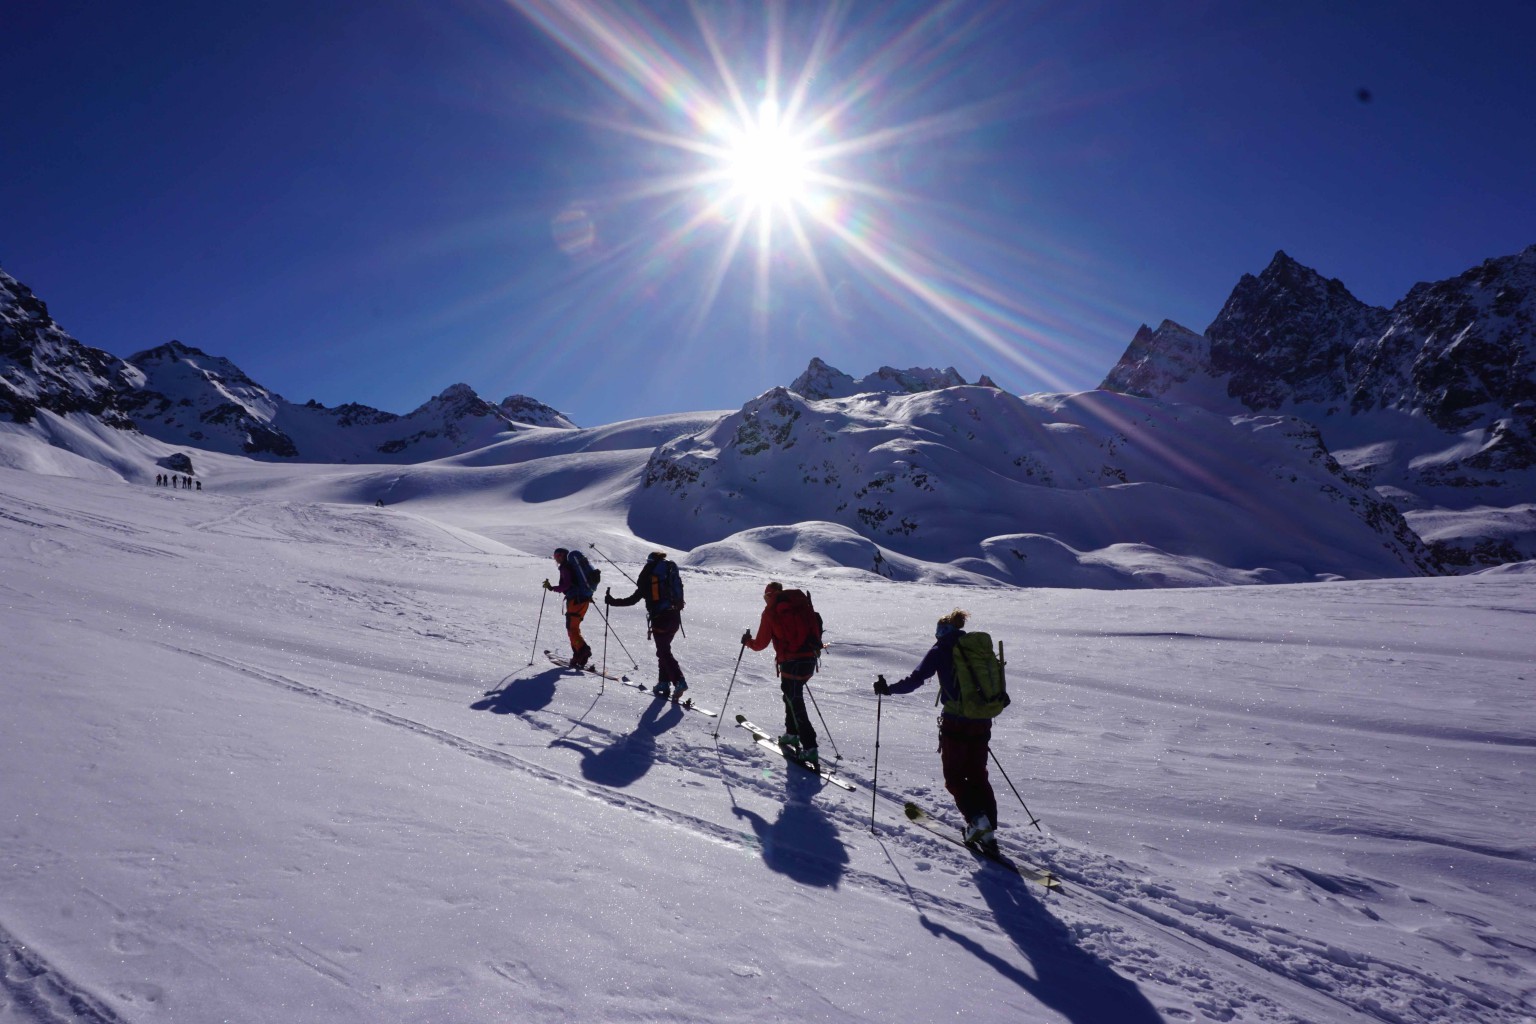 Ski touring in the Ötztal Alps, 6 days with Wildspitze ascent. 6-day ...